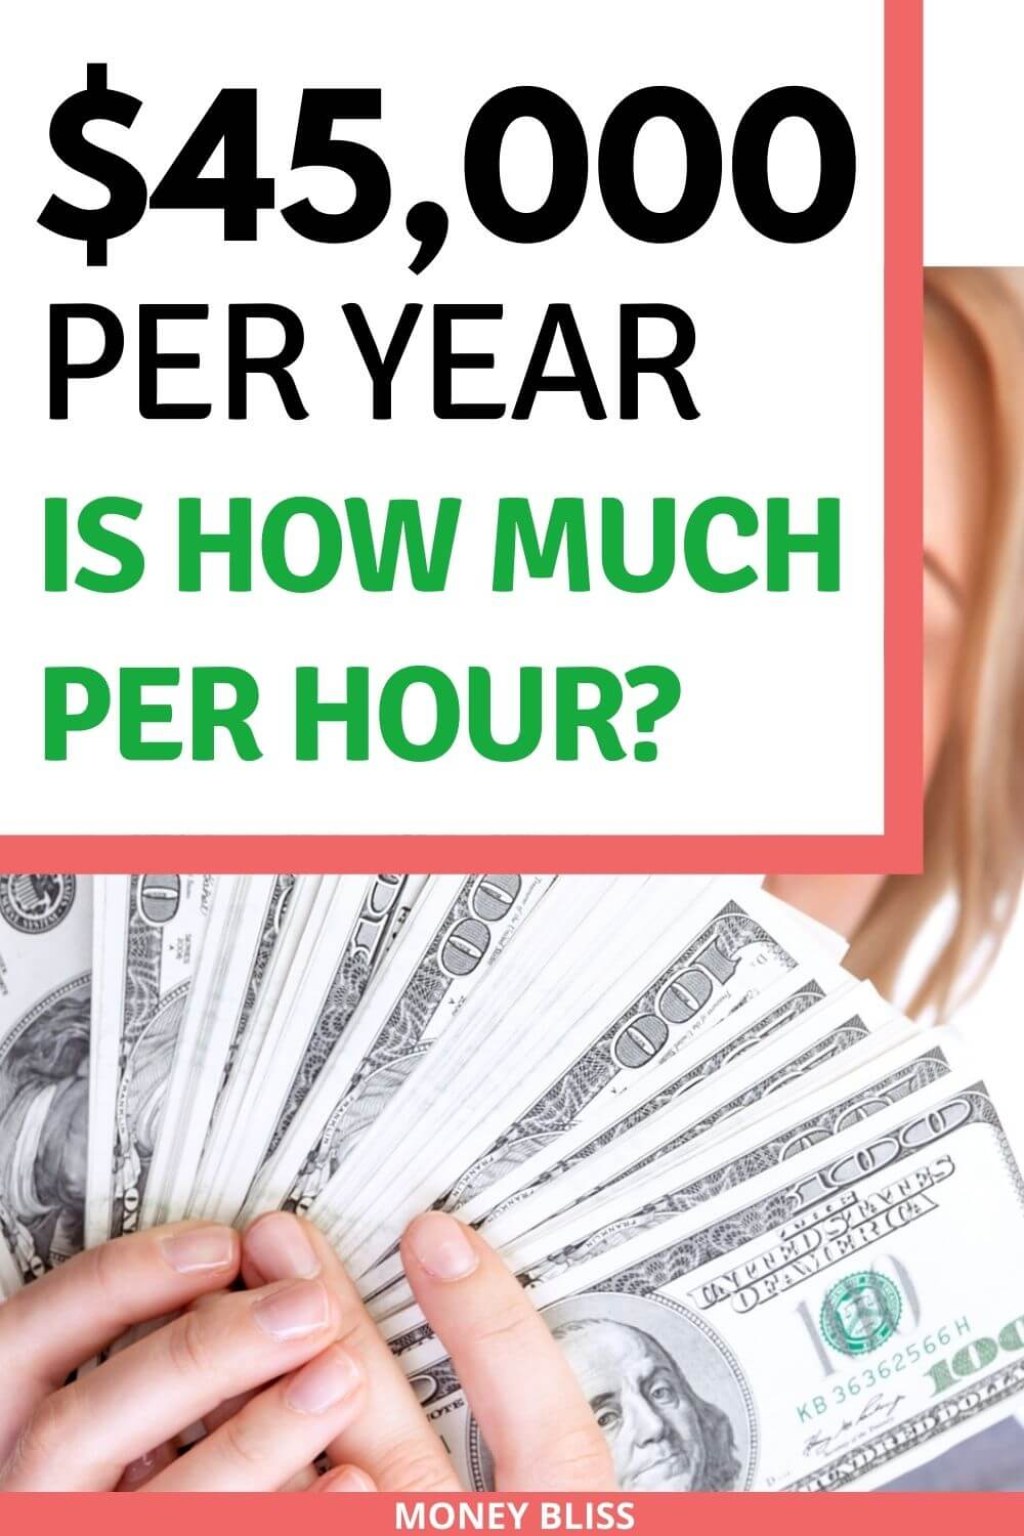 a year is how much an hour good salary or no money bliss 8